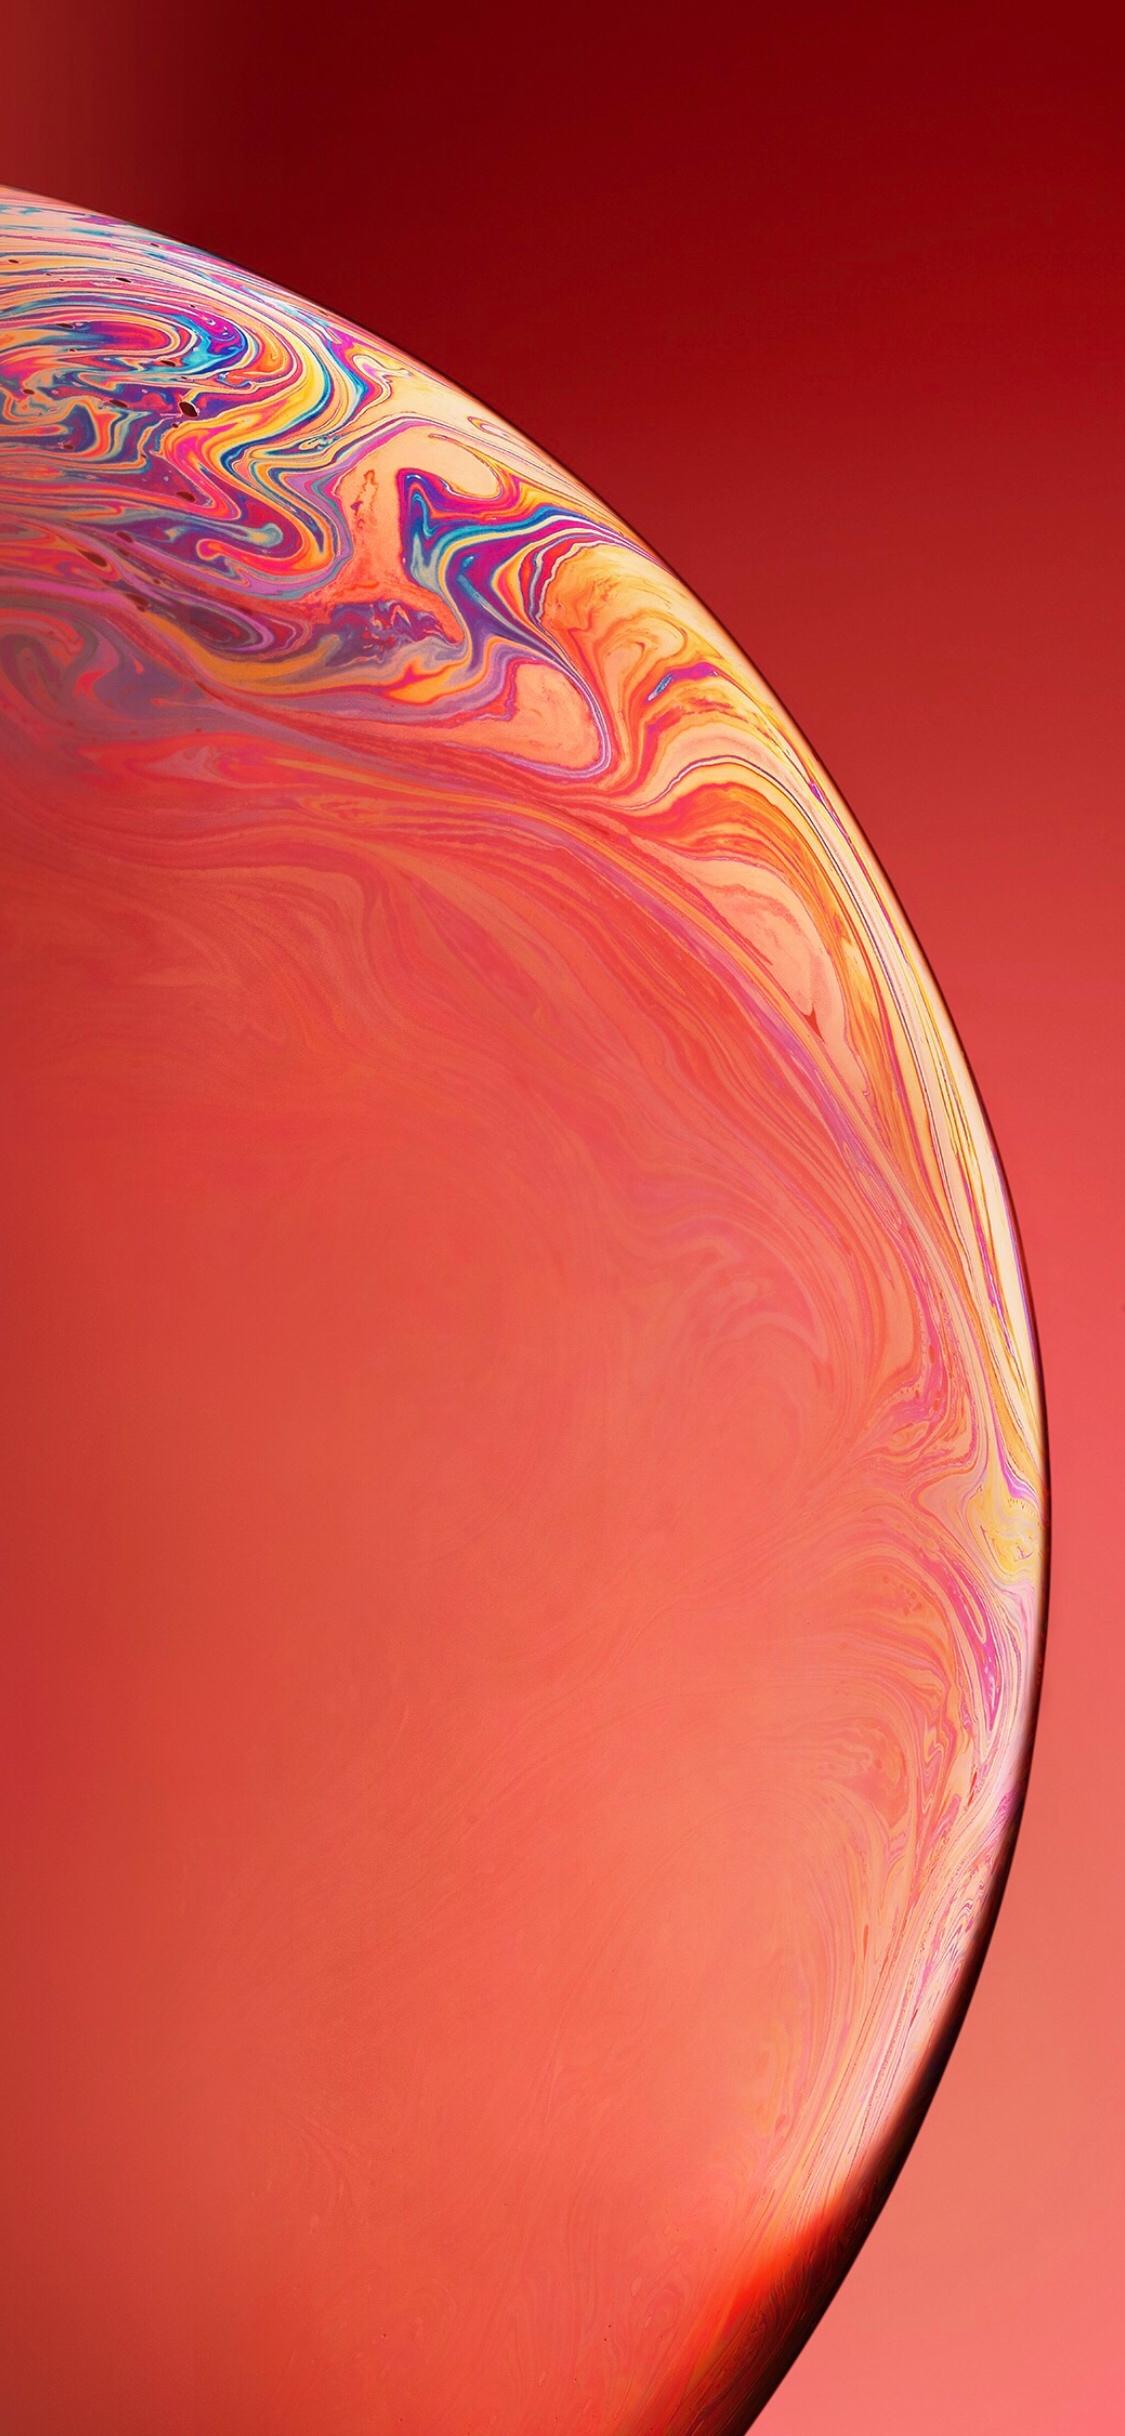 Check out these 15 beautiful iPhone XS and iPhone XR wallpaper